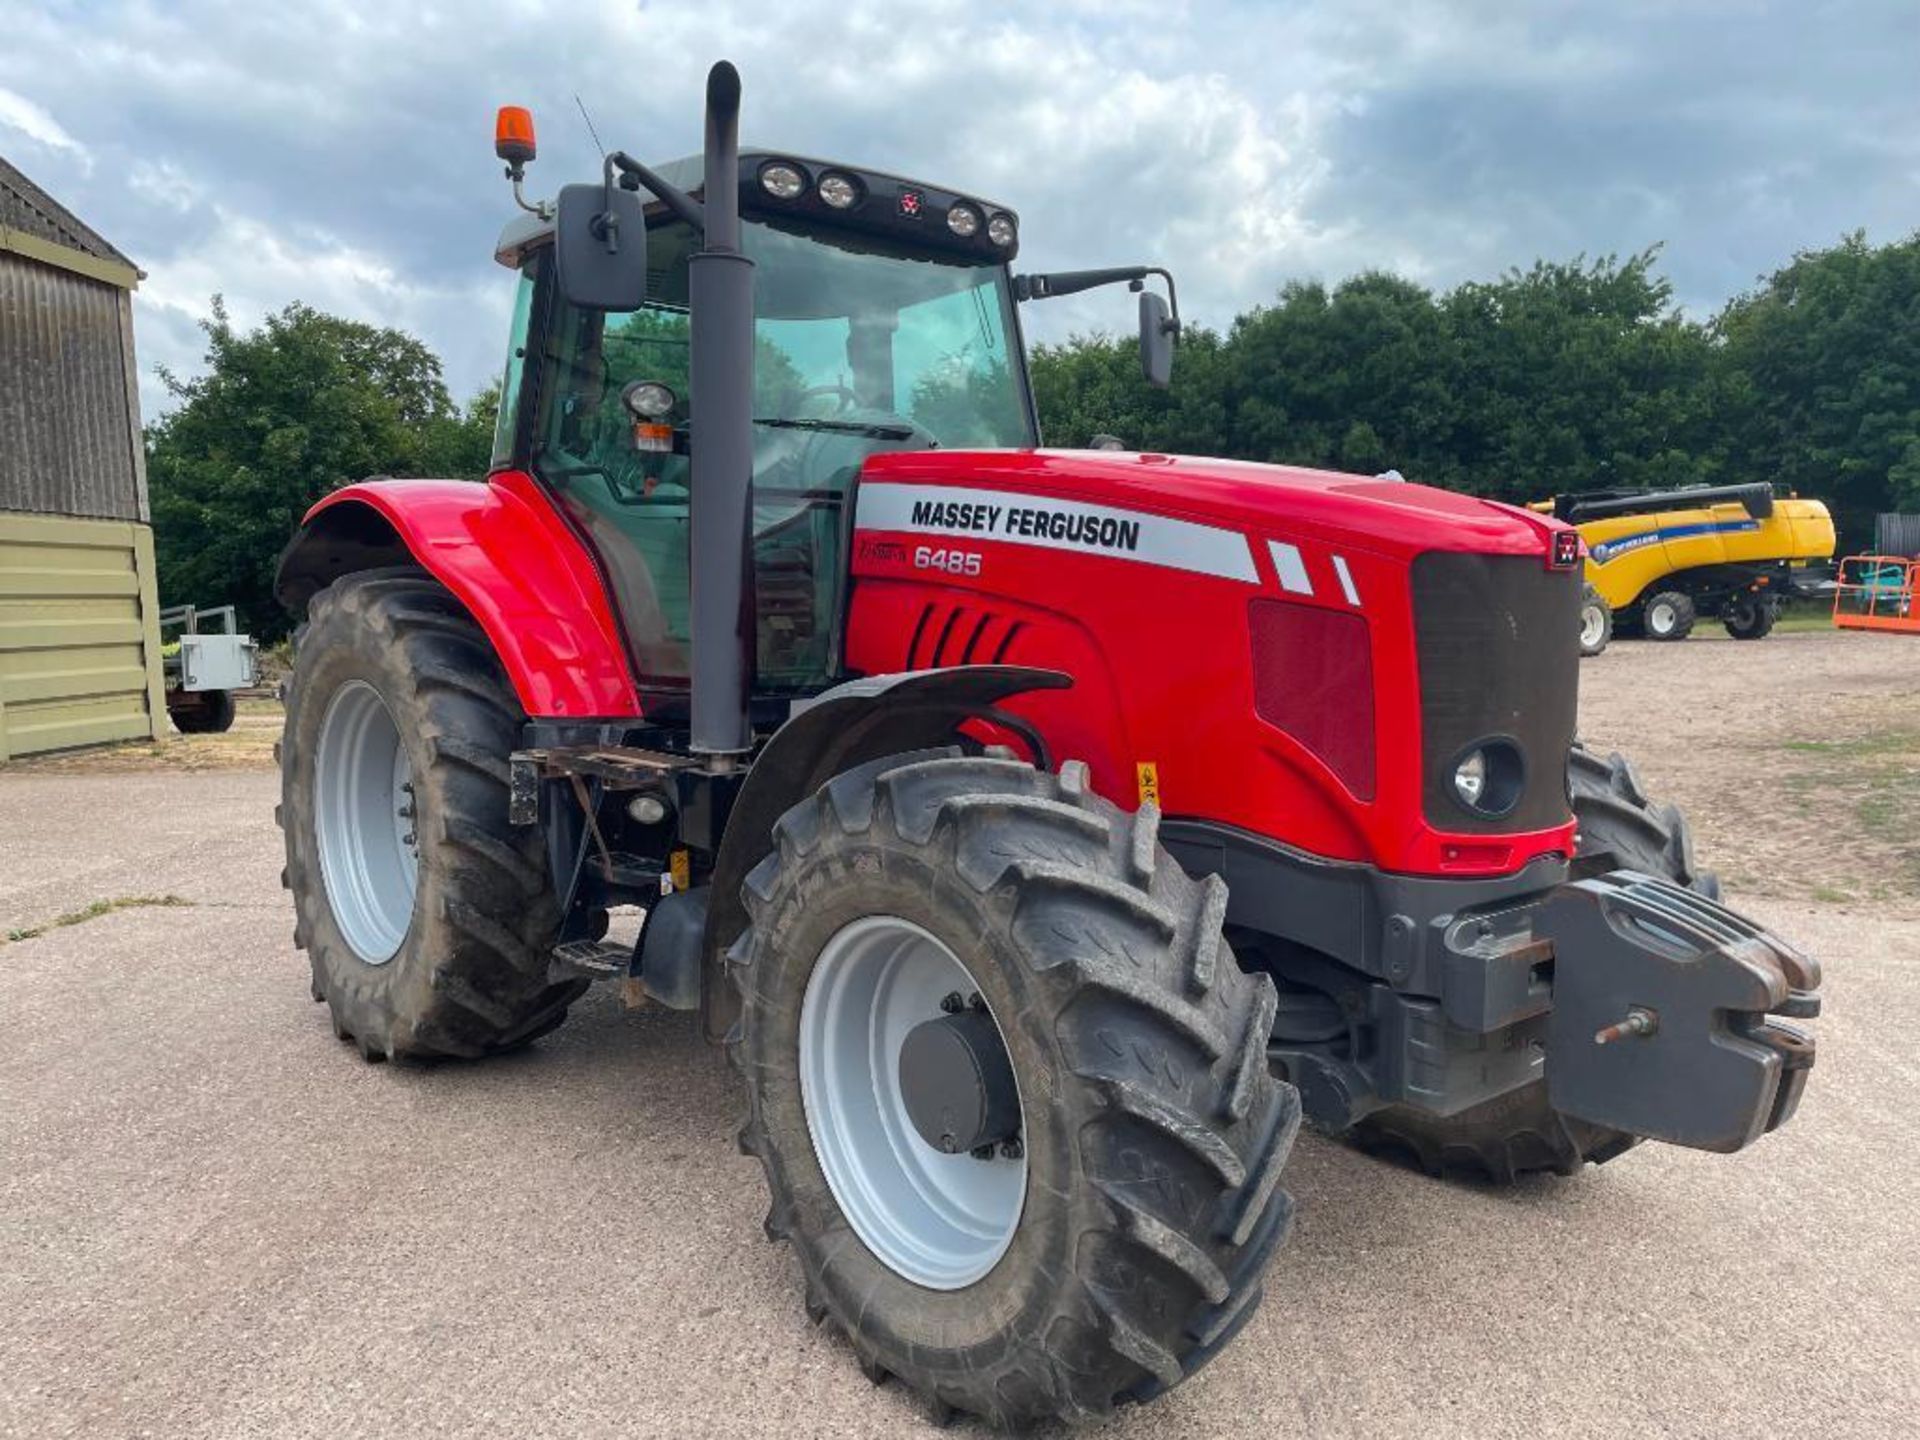 2011 Massey Ferguson 6485 Dyna-6 50kph 4wd tractor with 4 manual spools cab and front suspension and - Image 11 of 26